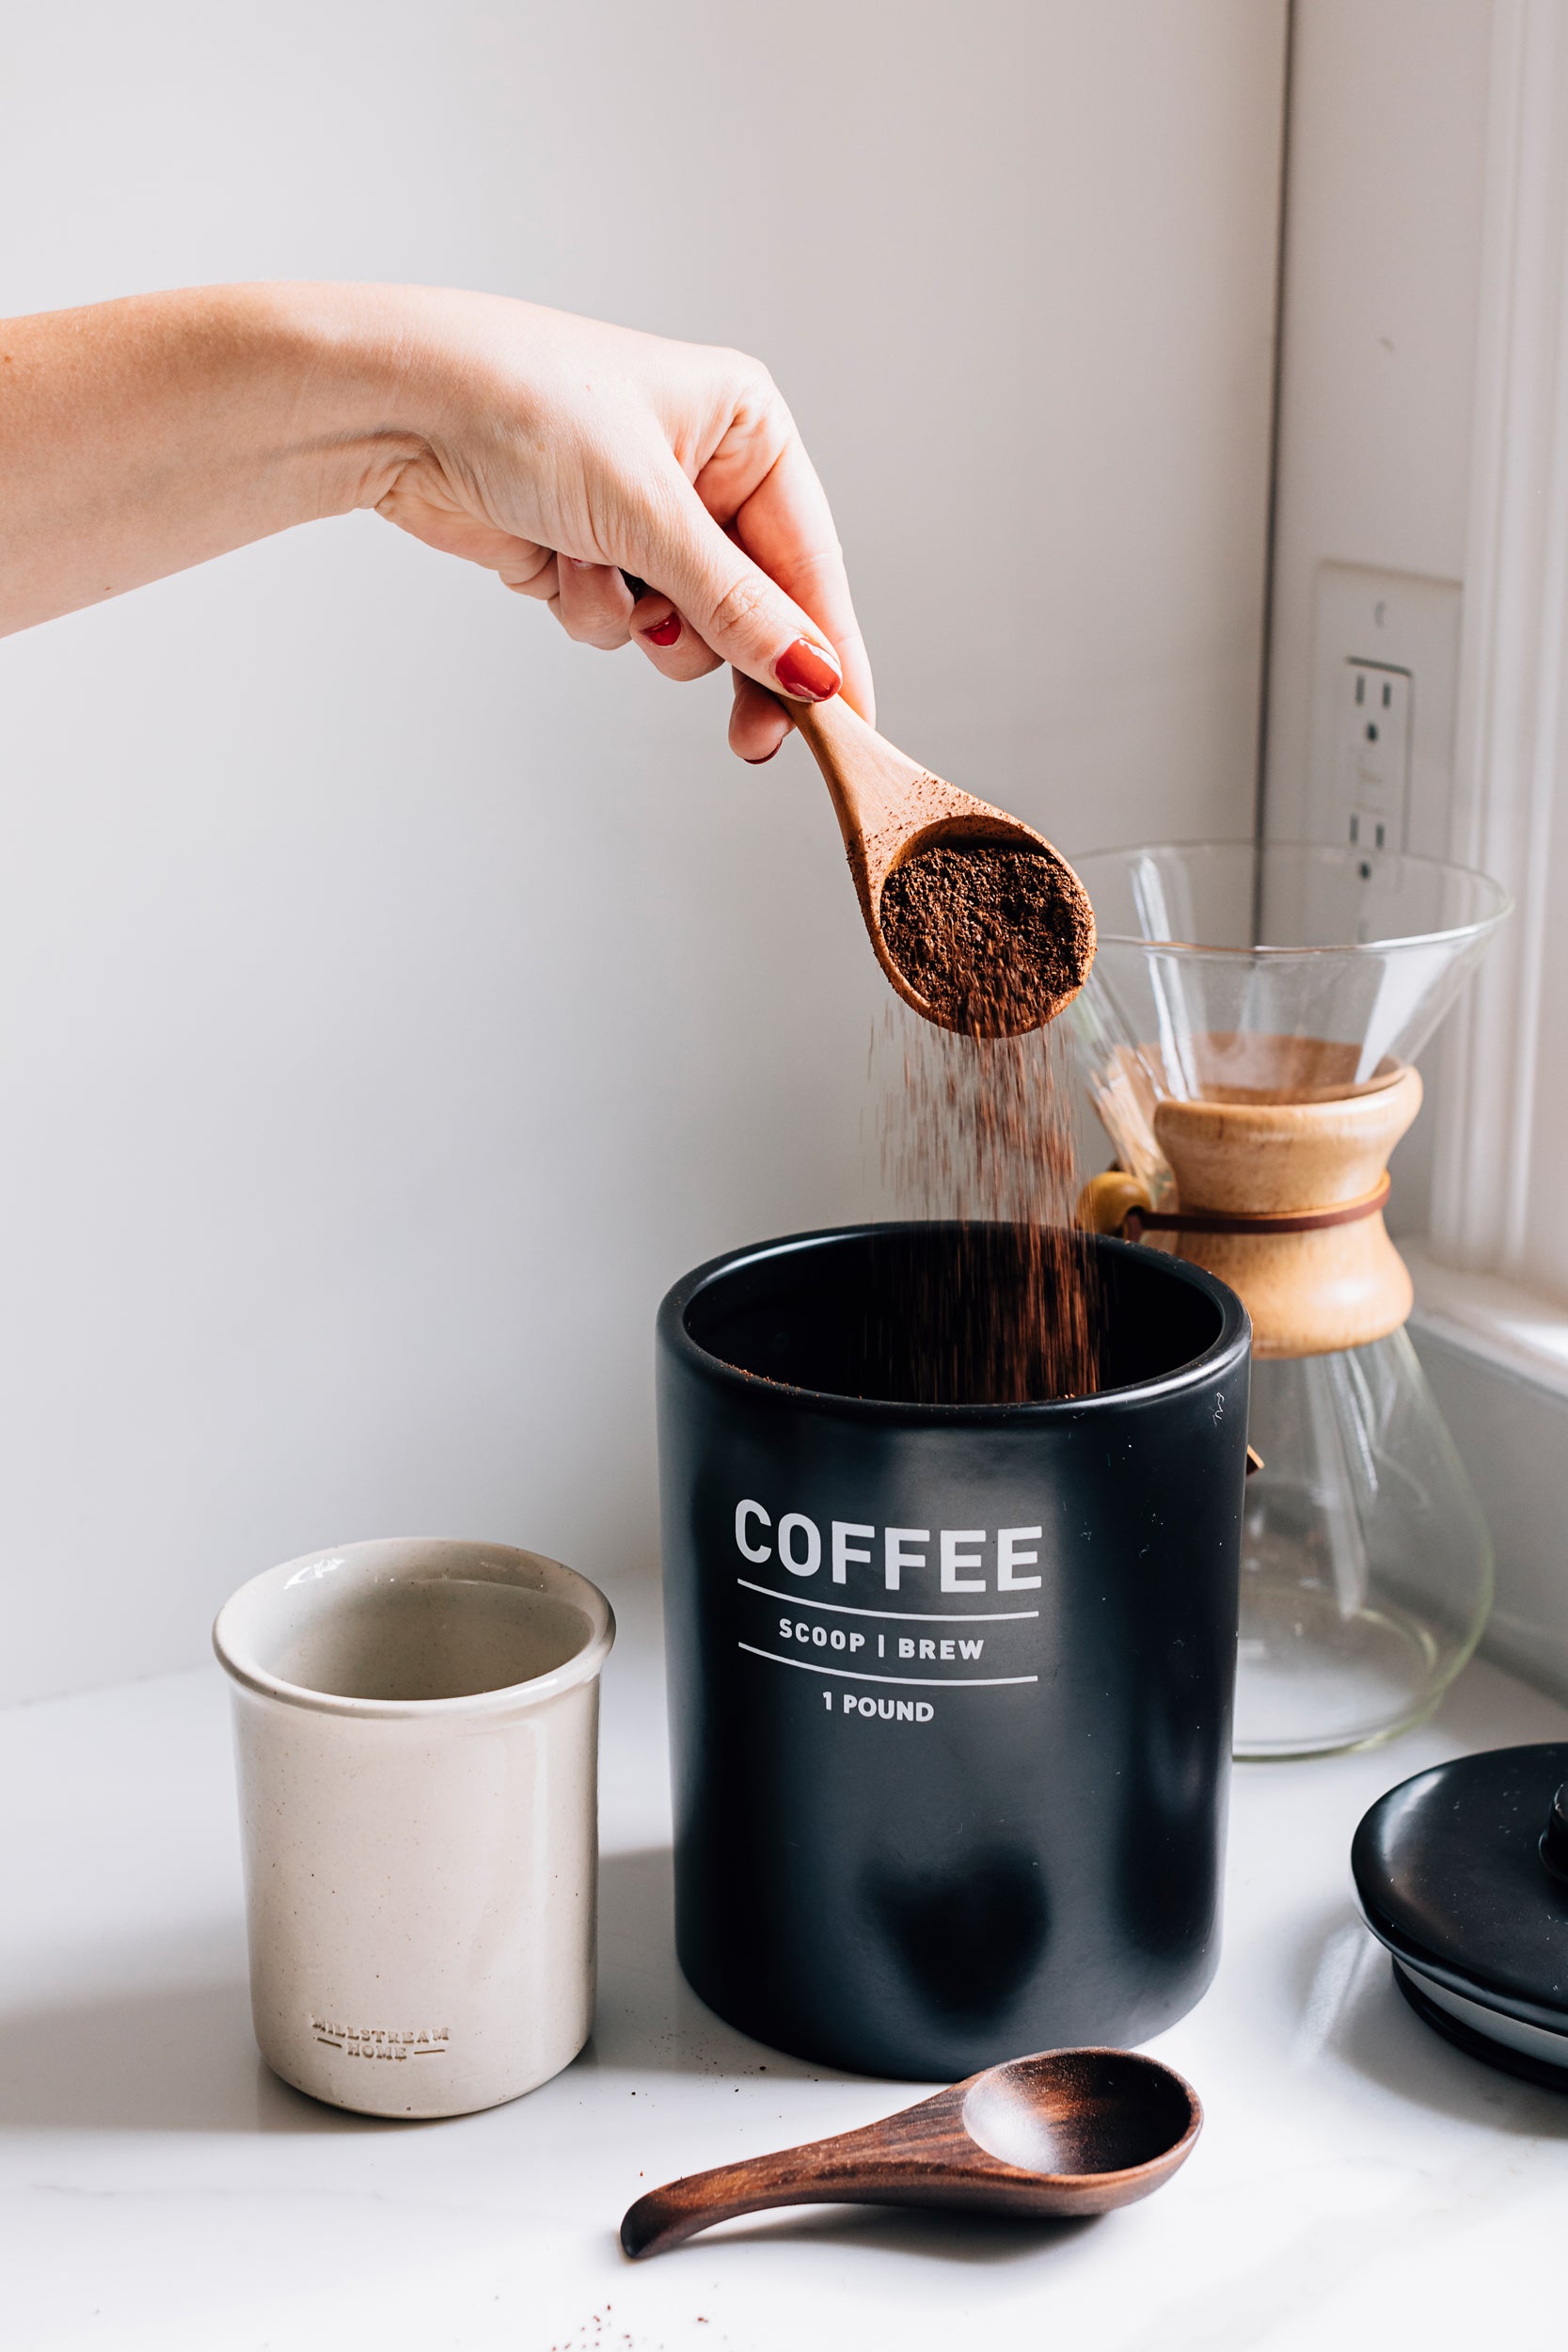 The Coffee Scoop Pouring Coffee Grounds into a Cup